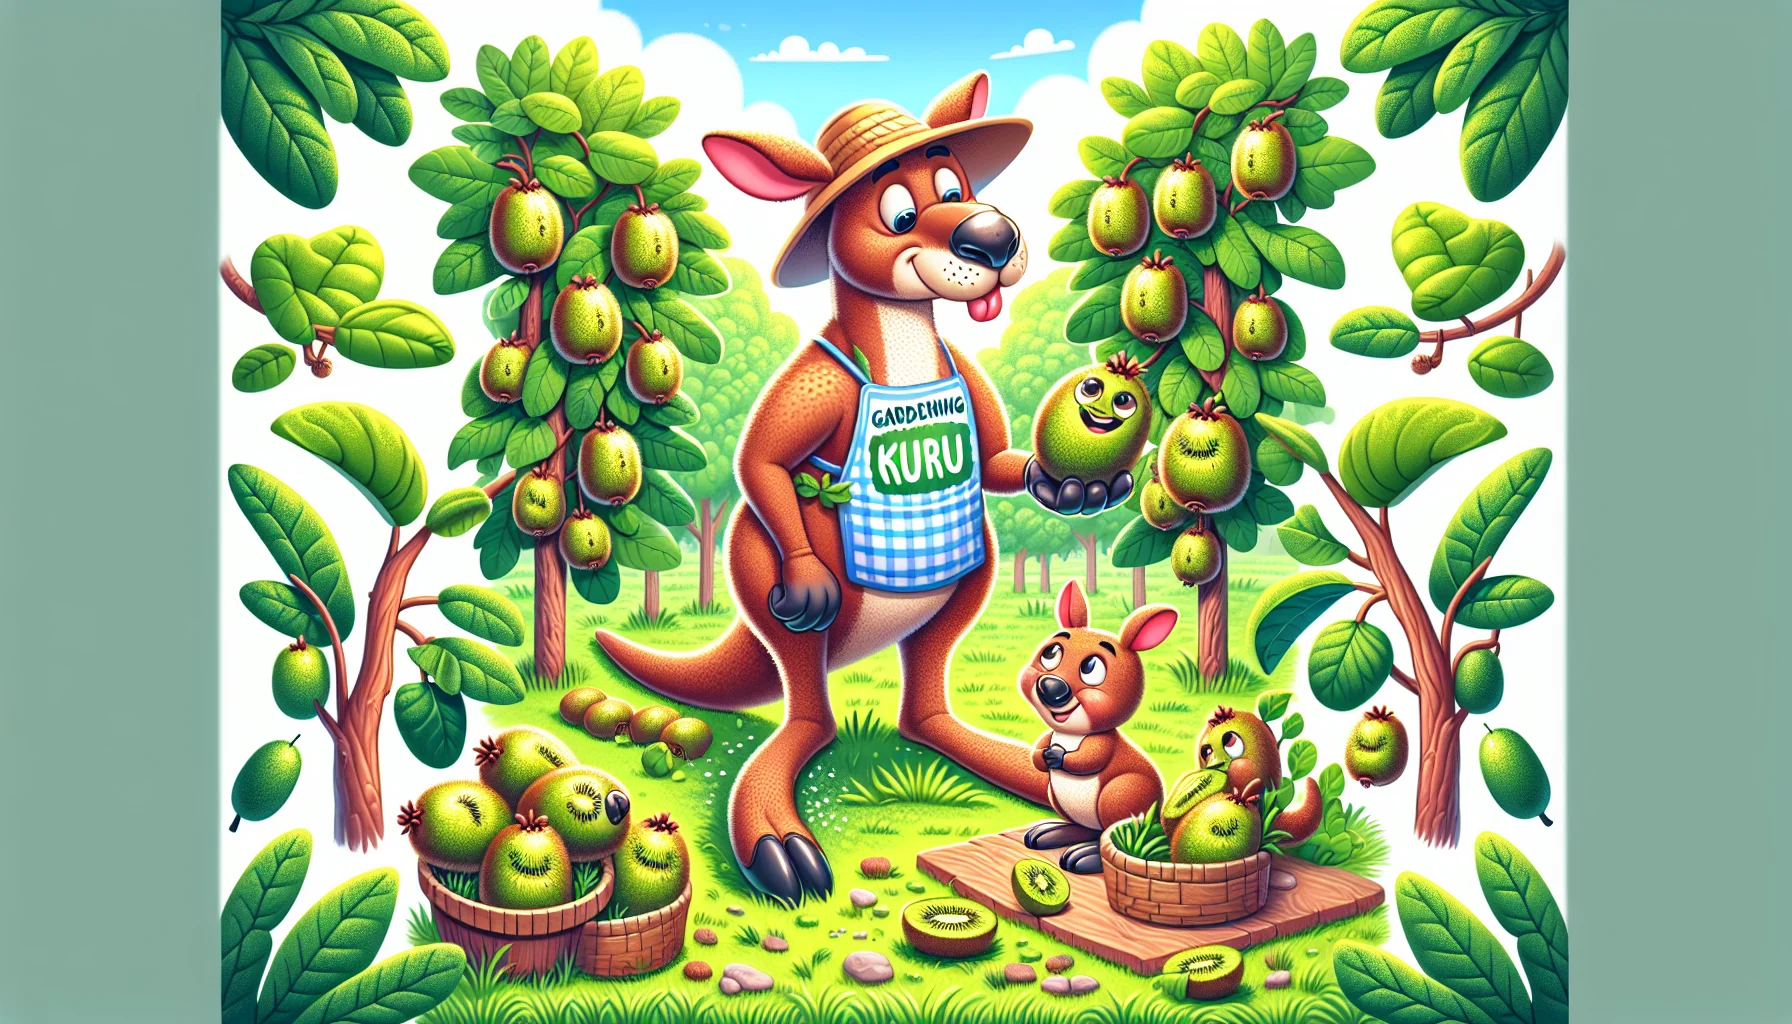 Create a humorous, vivid and realistic image of a gardening scene. In the center, there is a prominent kangaroo routinely checking the ripeness of kiwi fruits. The kangaroo is illustrated anthropomorphically, standing upright, and wearing a sun hat and a bib saying 'Gardening Guru'. There's a diverse array of kiwi trees, complete with luscious green leaves and ripening kiwi fruits. To add fun, the kiwi fruits have cheerful faces and are seen playing hide and seek around the kangaroo. Use this joyful scene to illustrate the process of ripening kiwi fruits and the enjoyment of gardening.